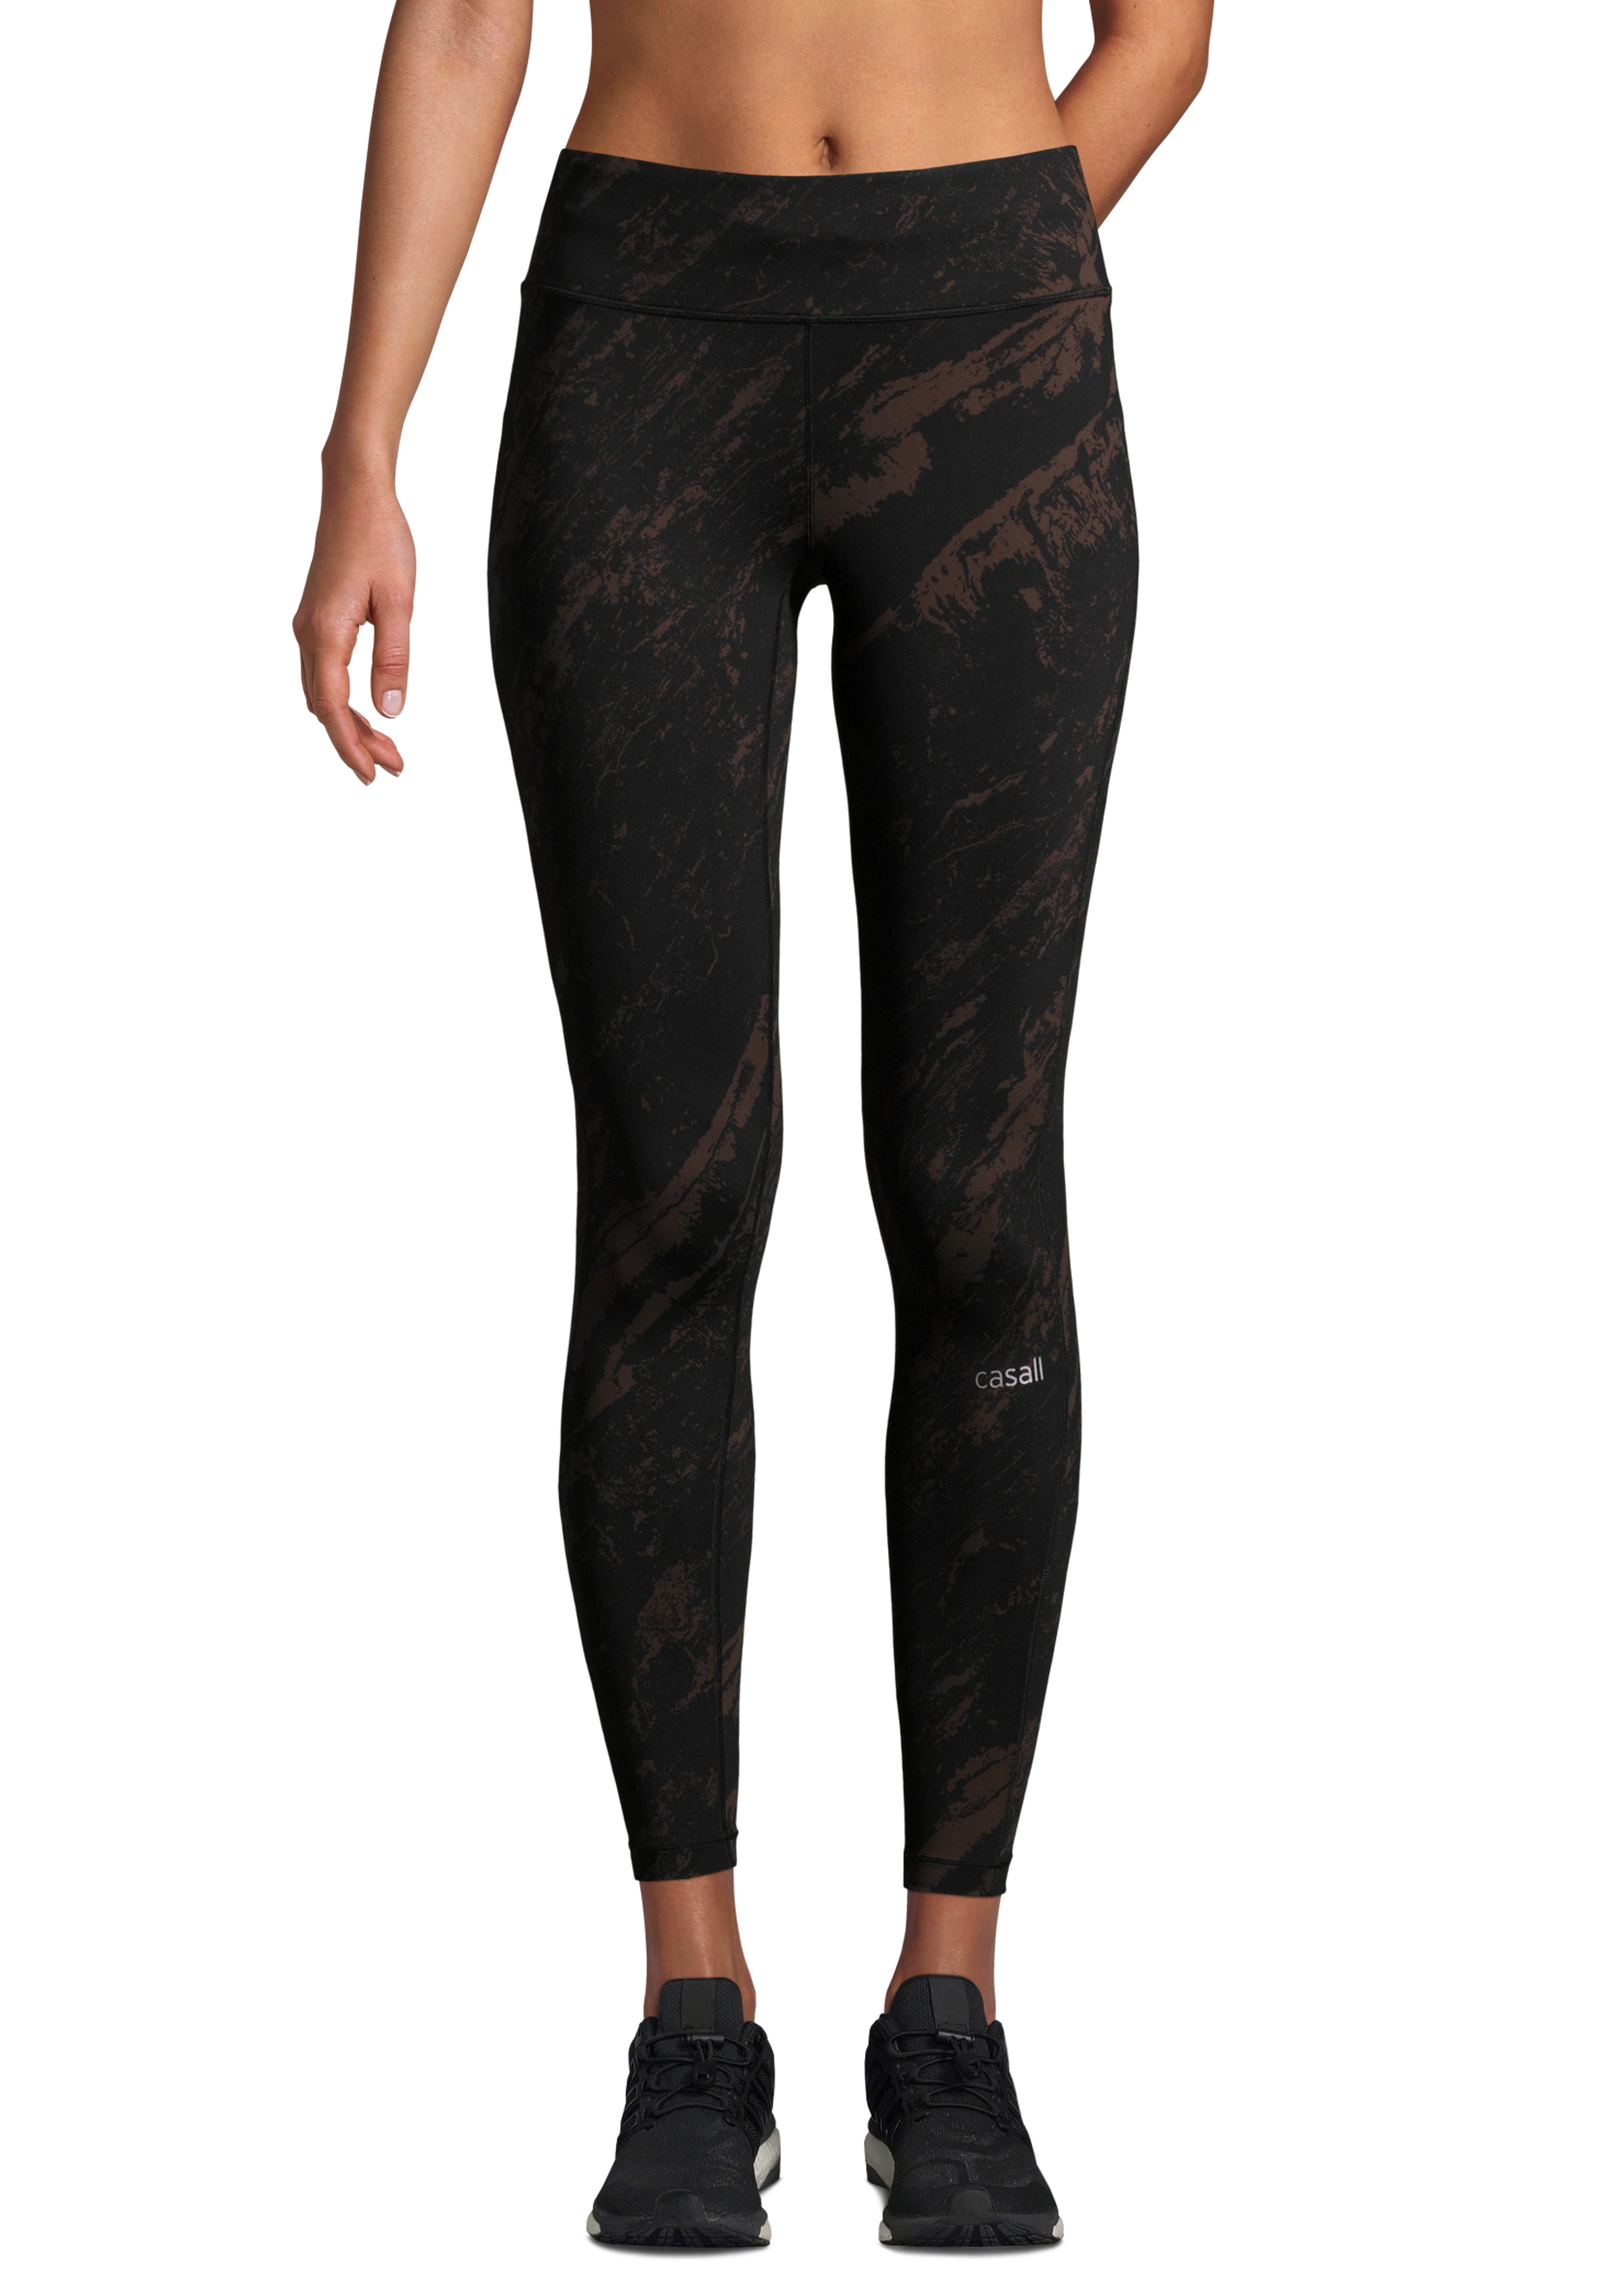 Classic Printed 7/8 Tights